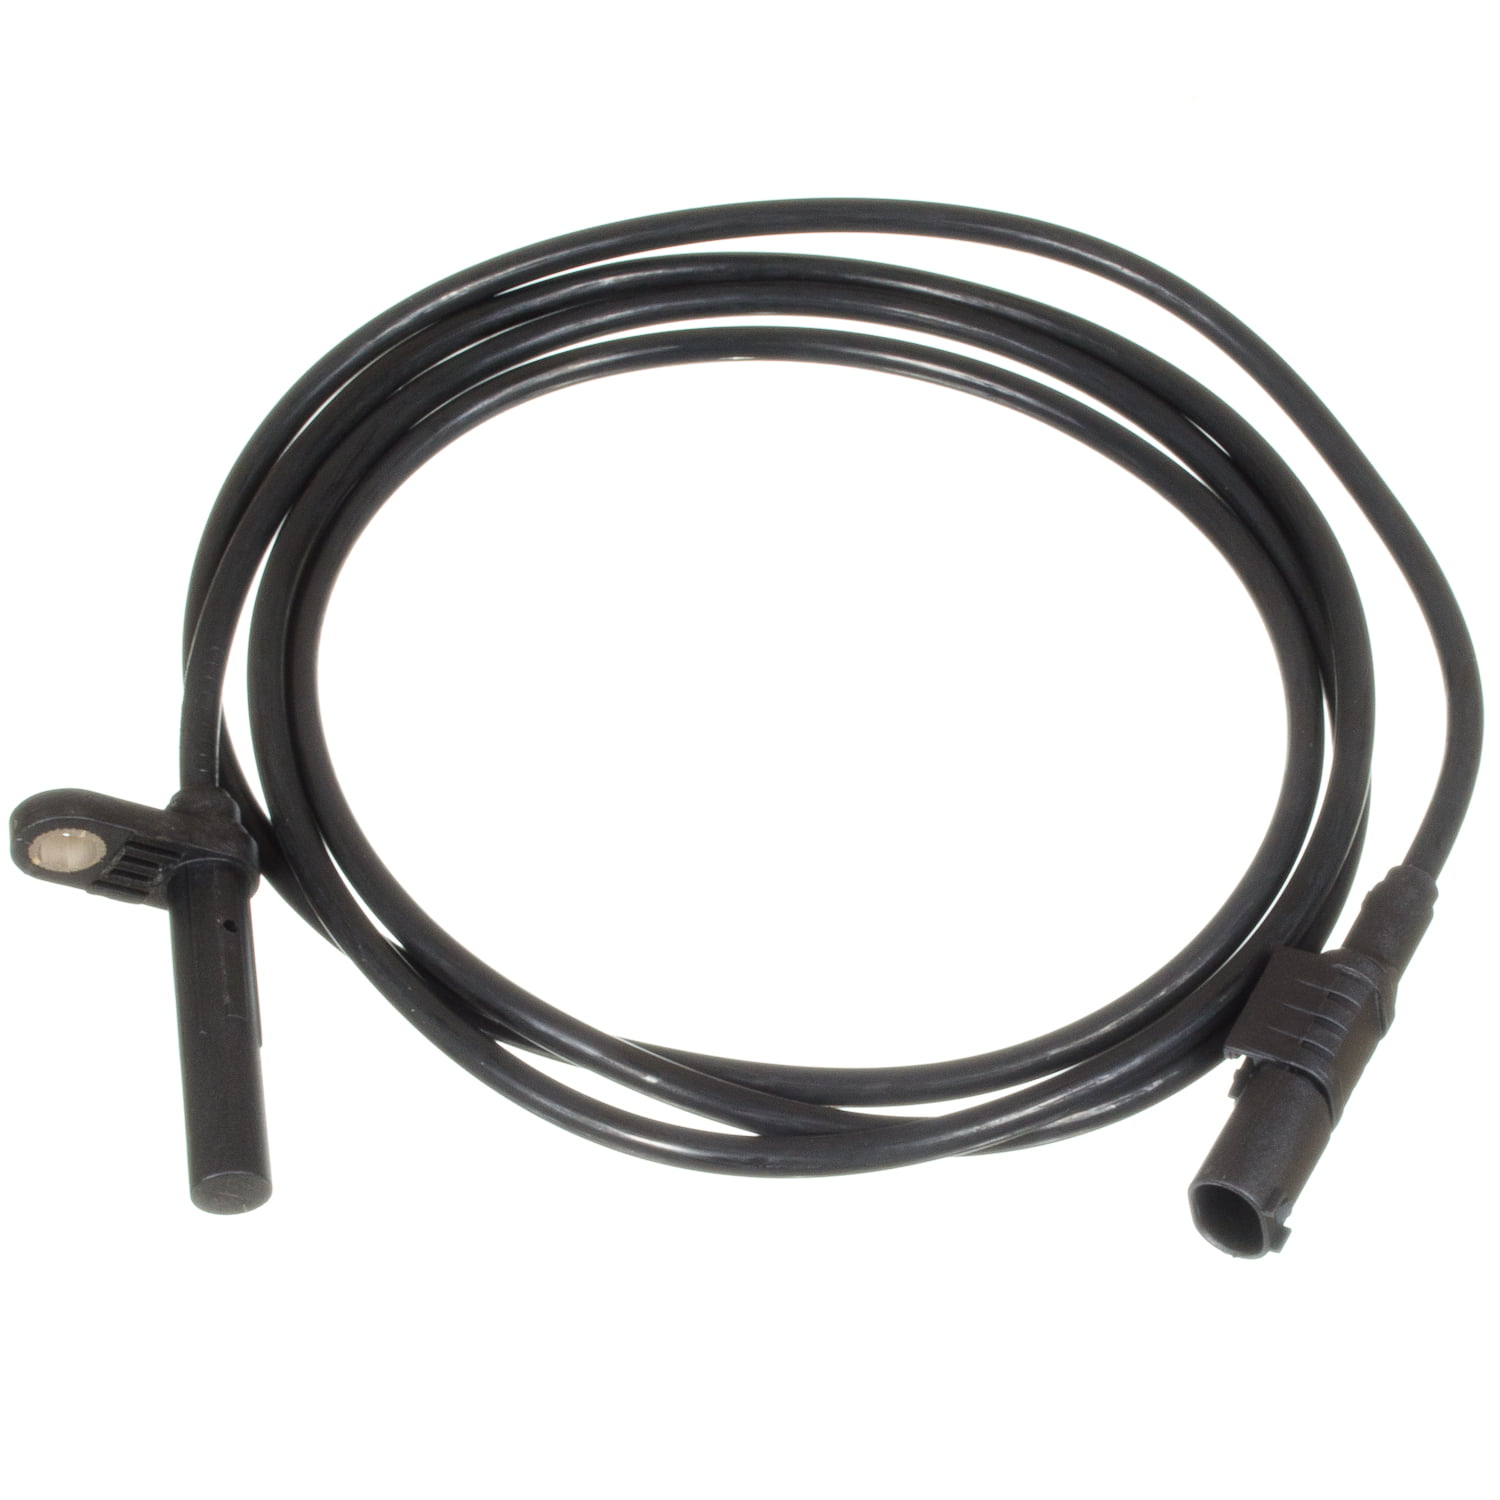 Mercedes ABS Speed Sensor Parts - Low Prices